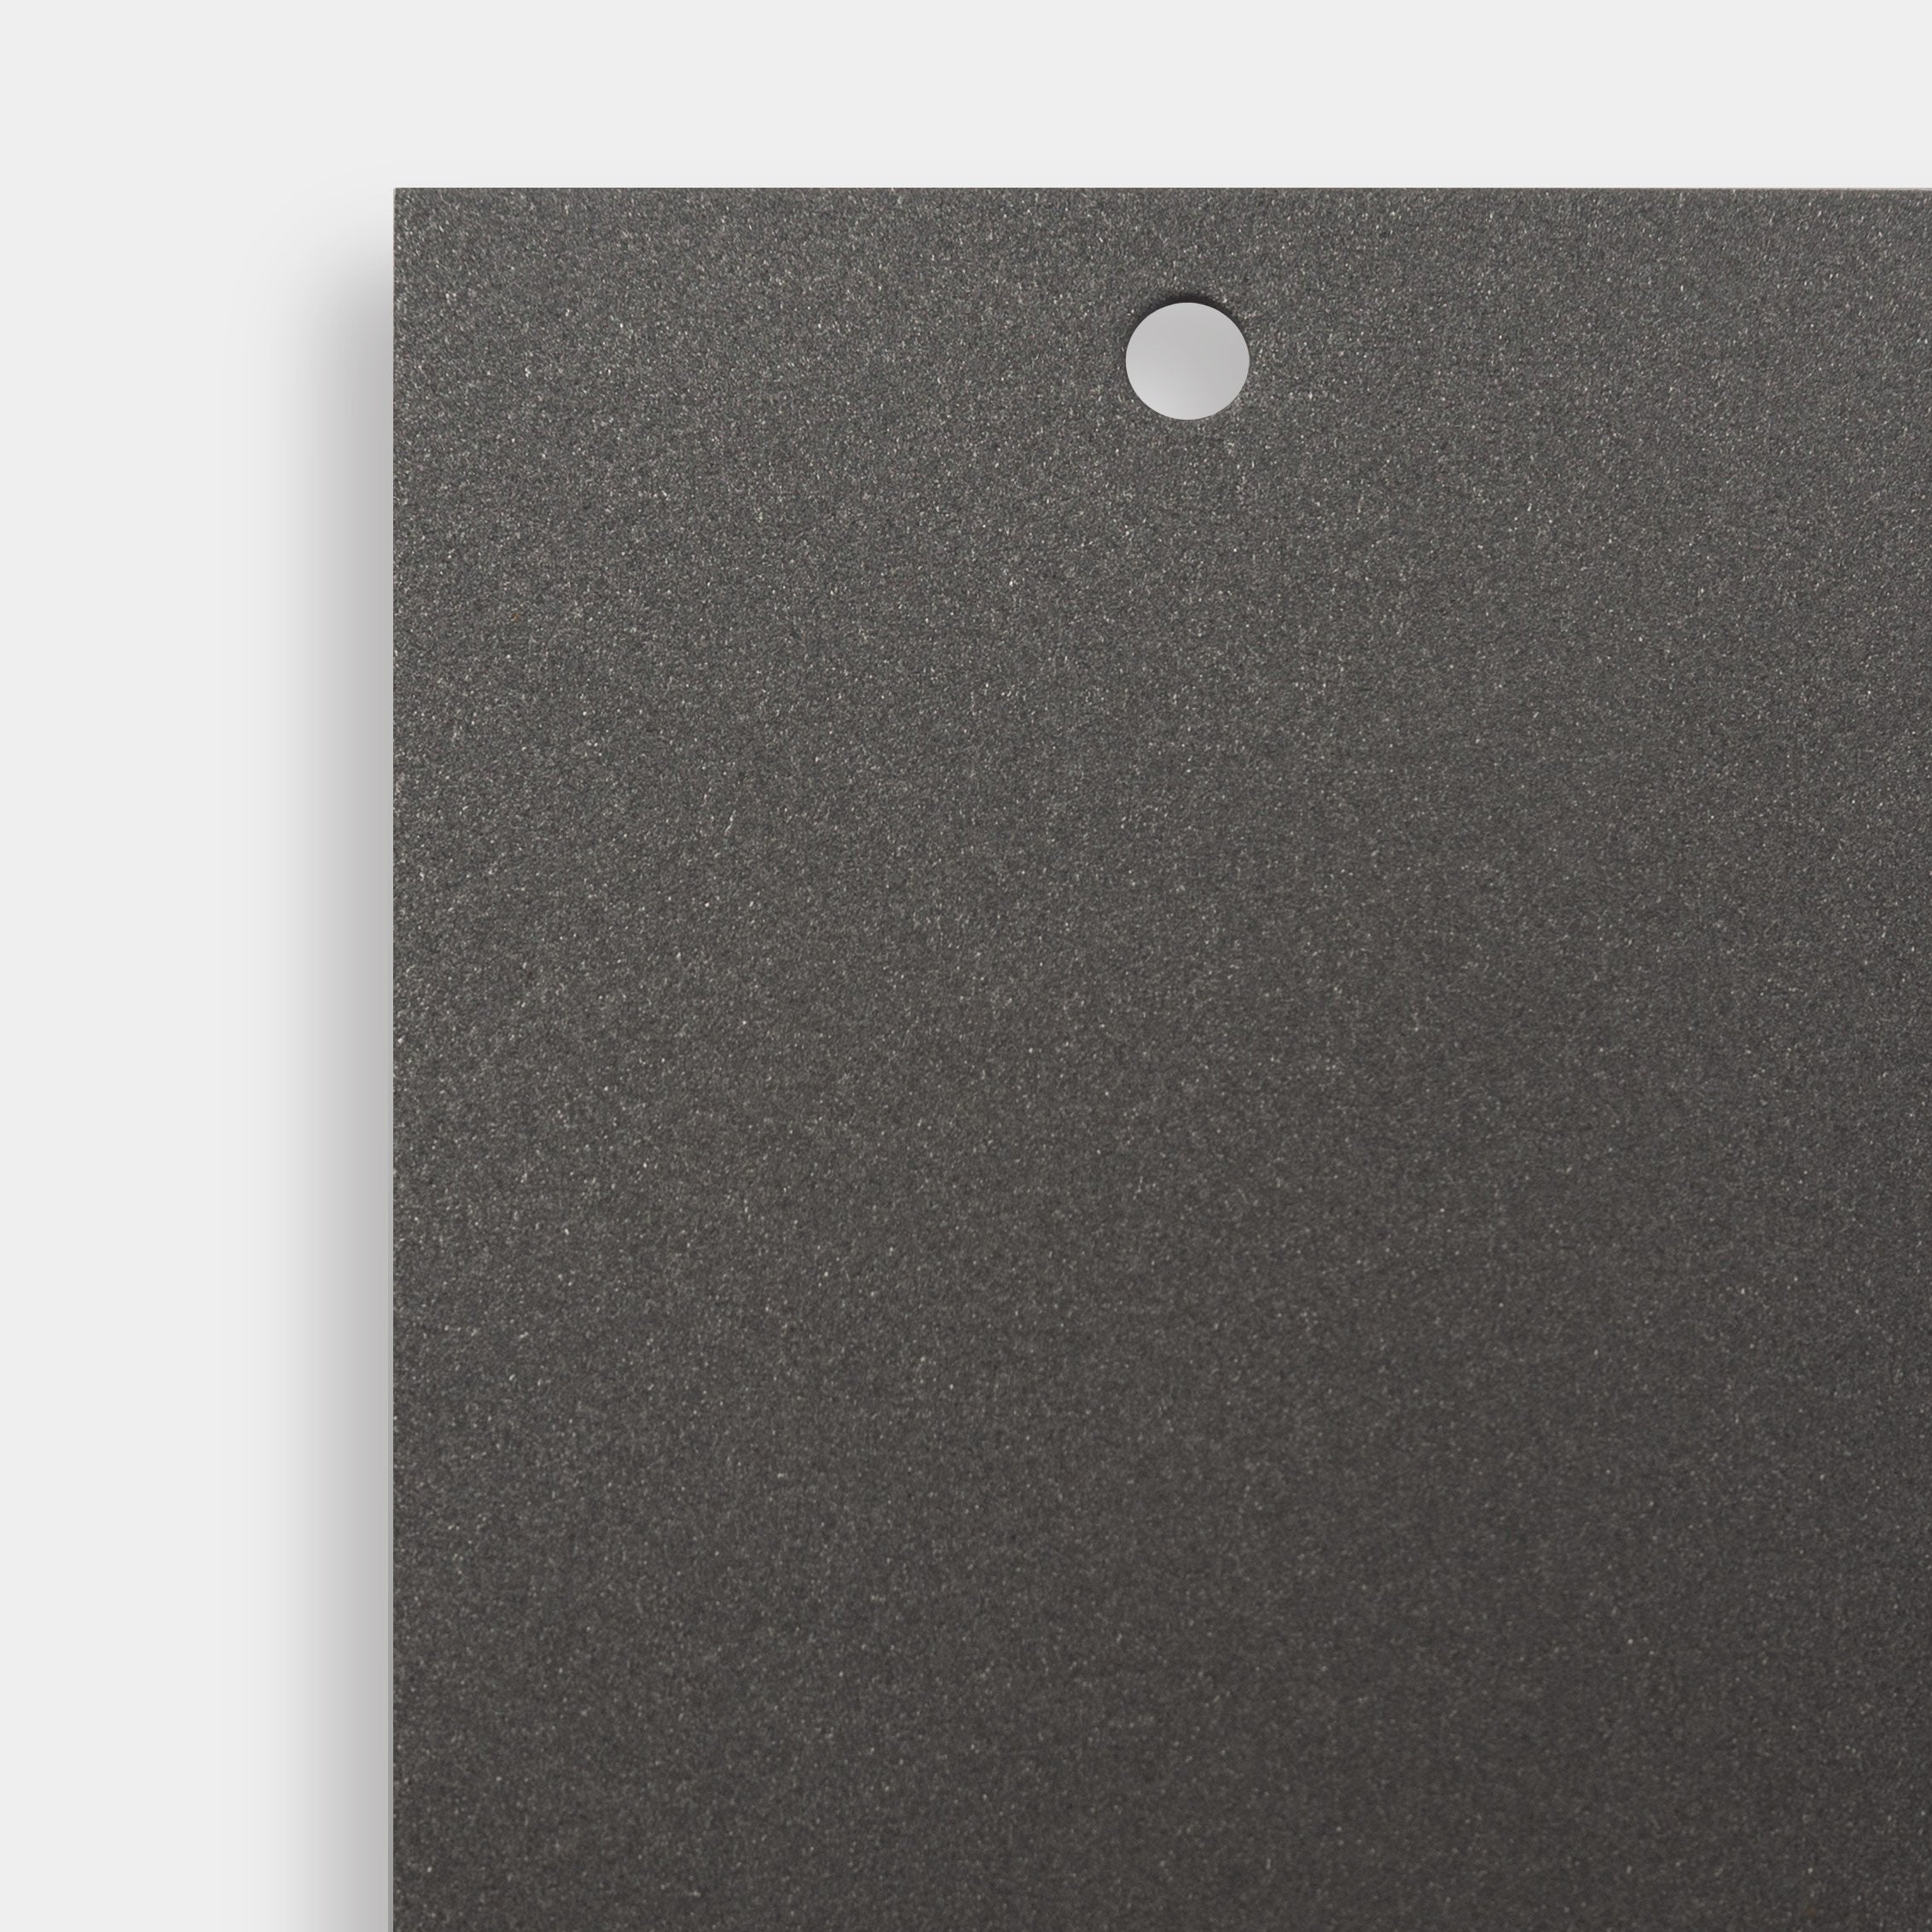 Coated Black Stainless Steel Sheet